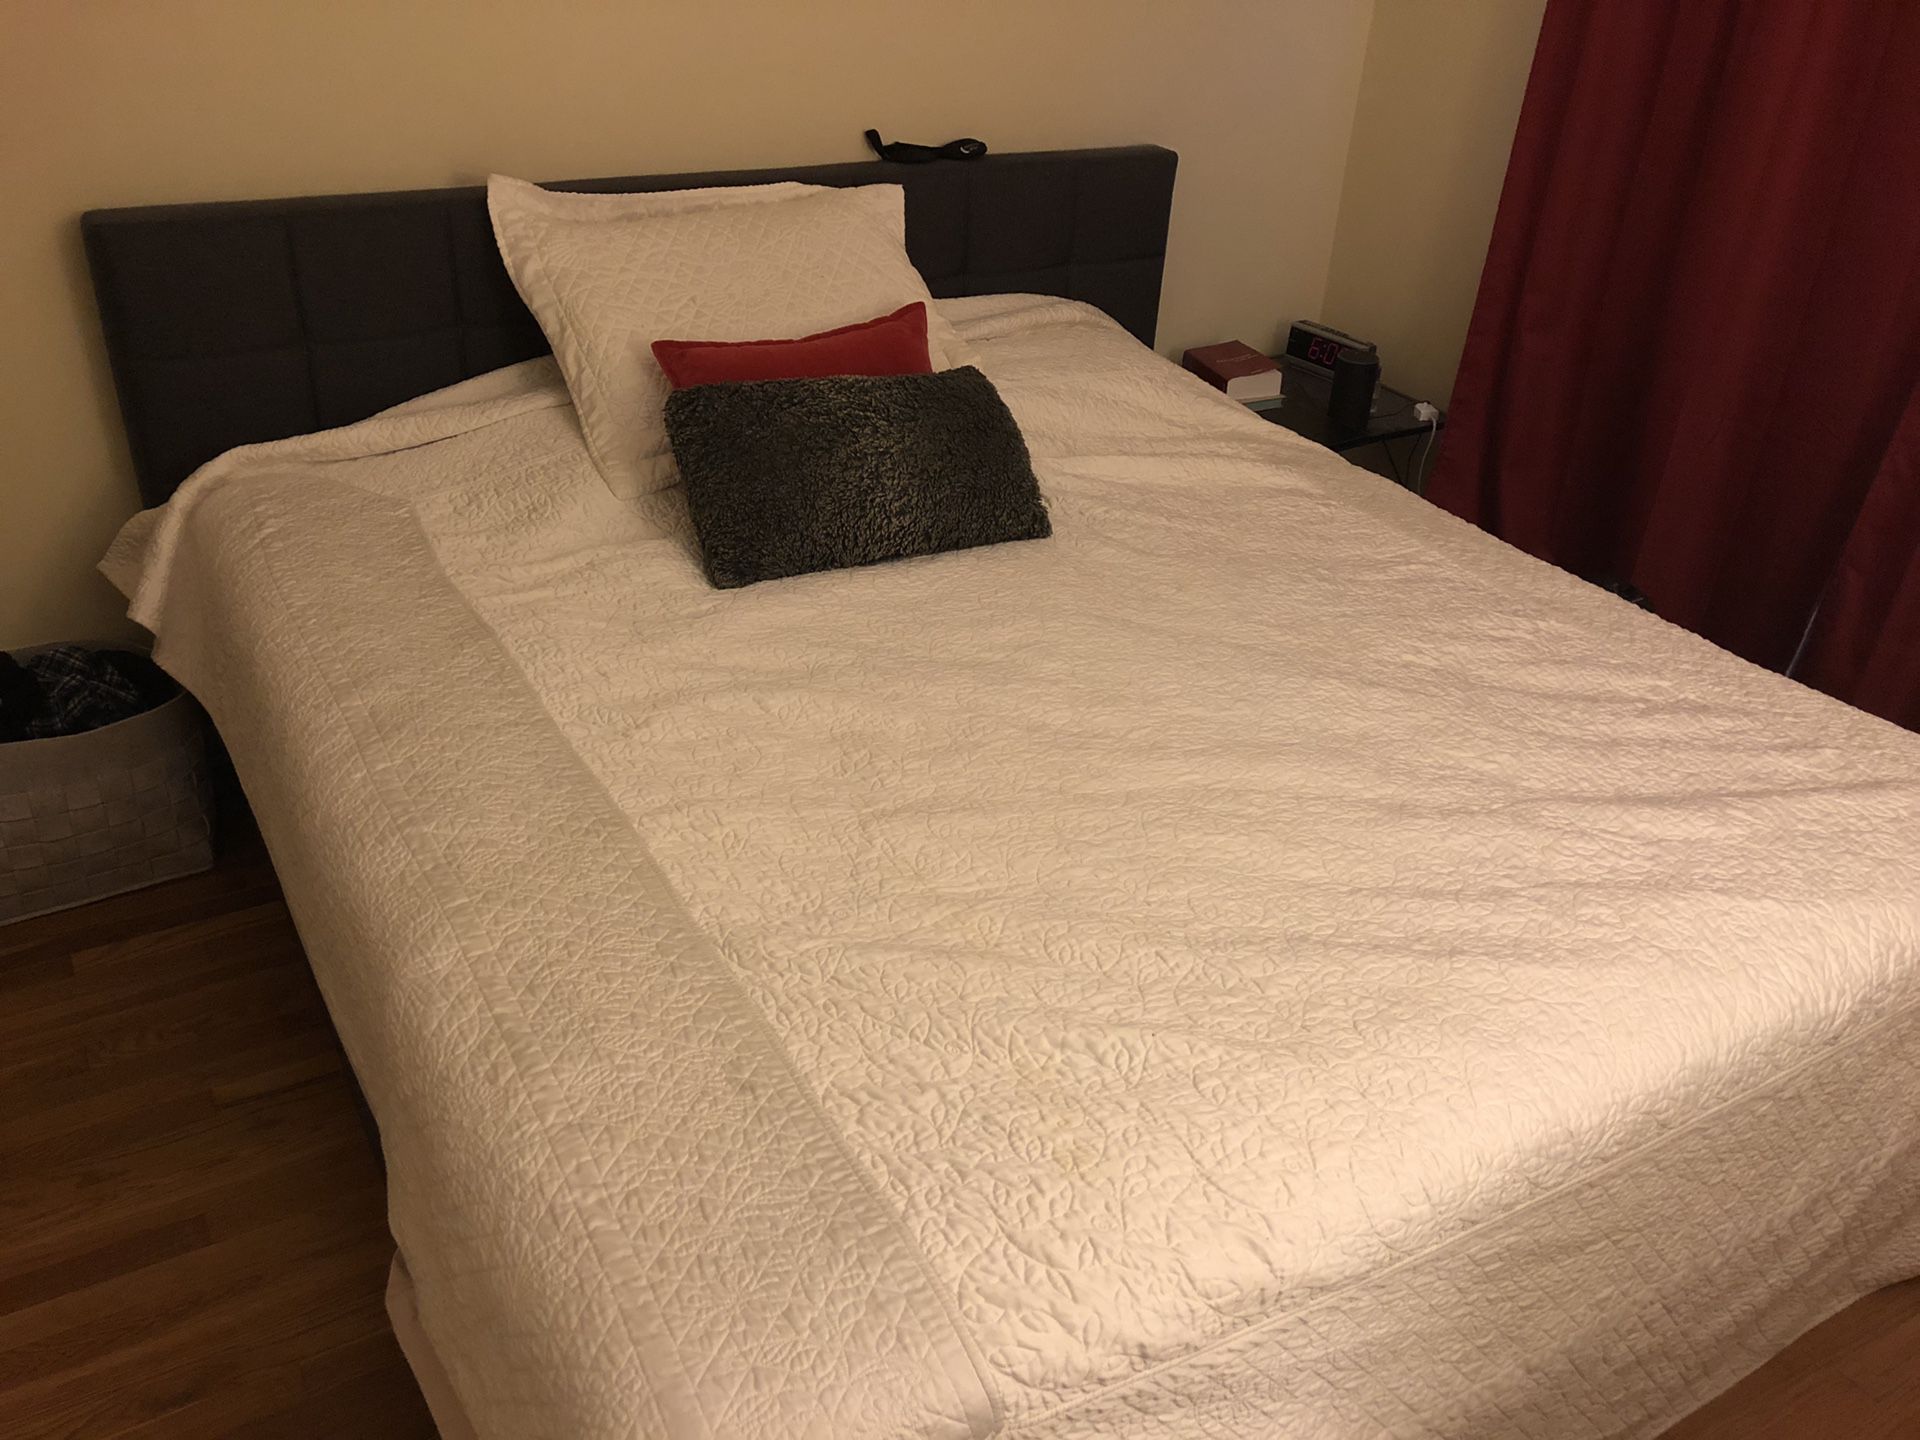 King sized bed and mattress. Same bed frame as in picture but headboard is slightly different.